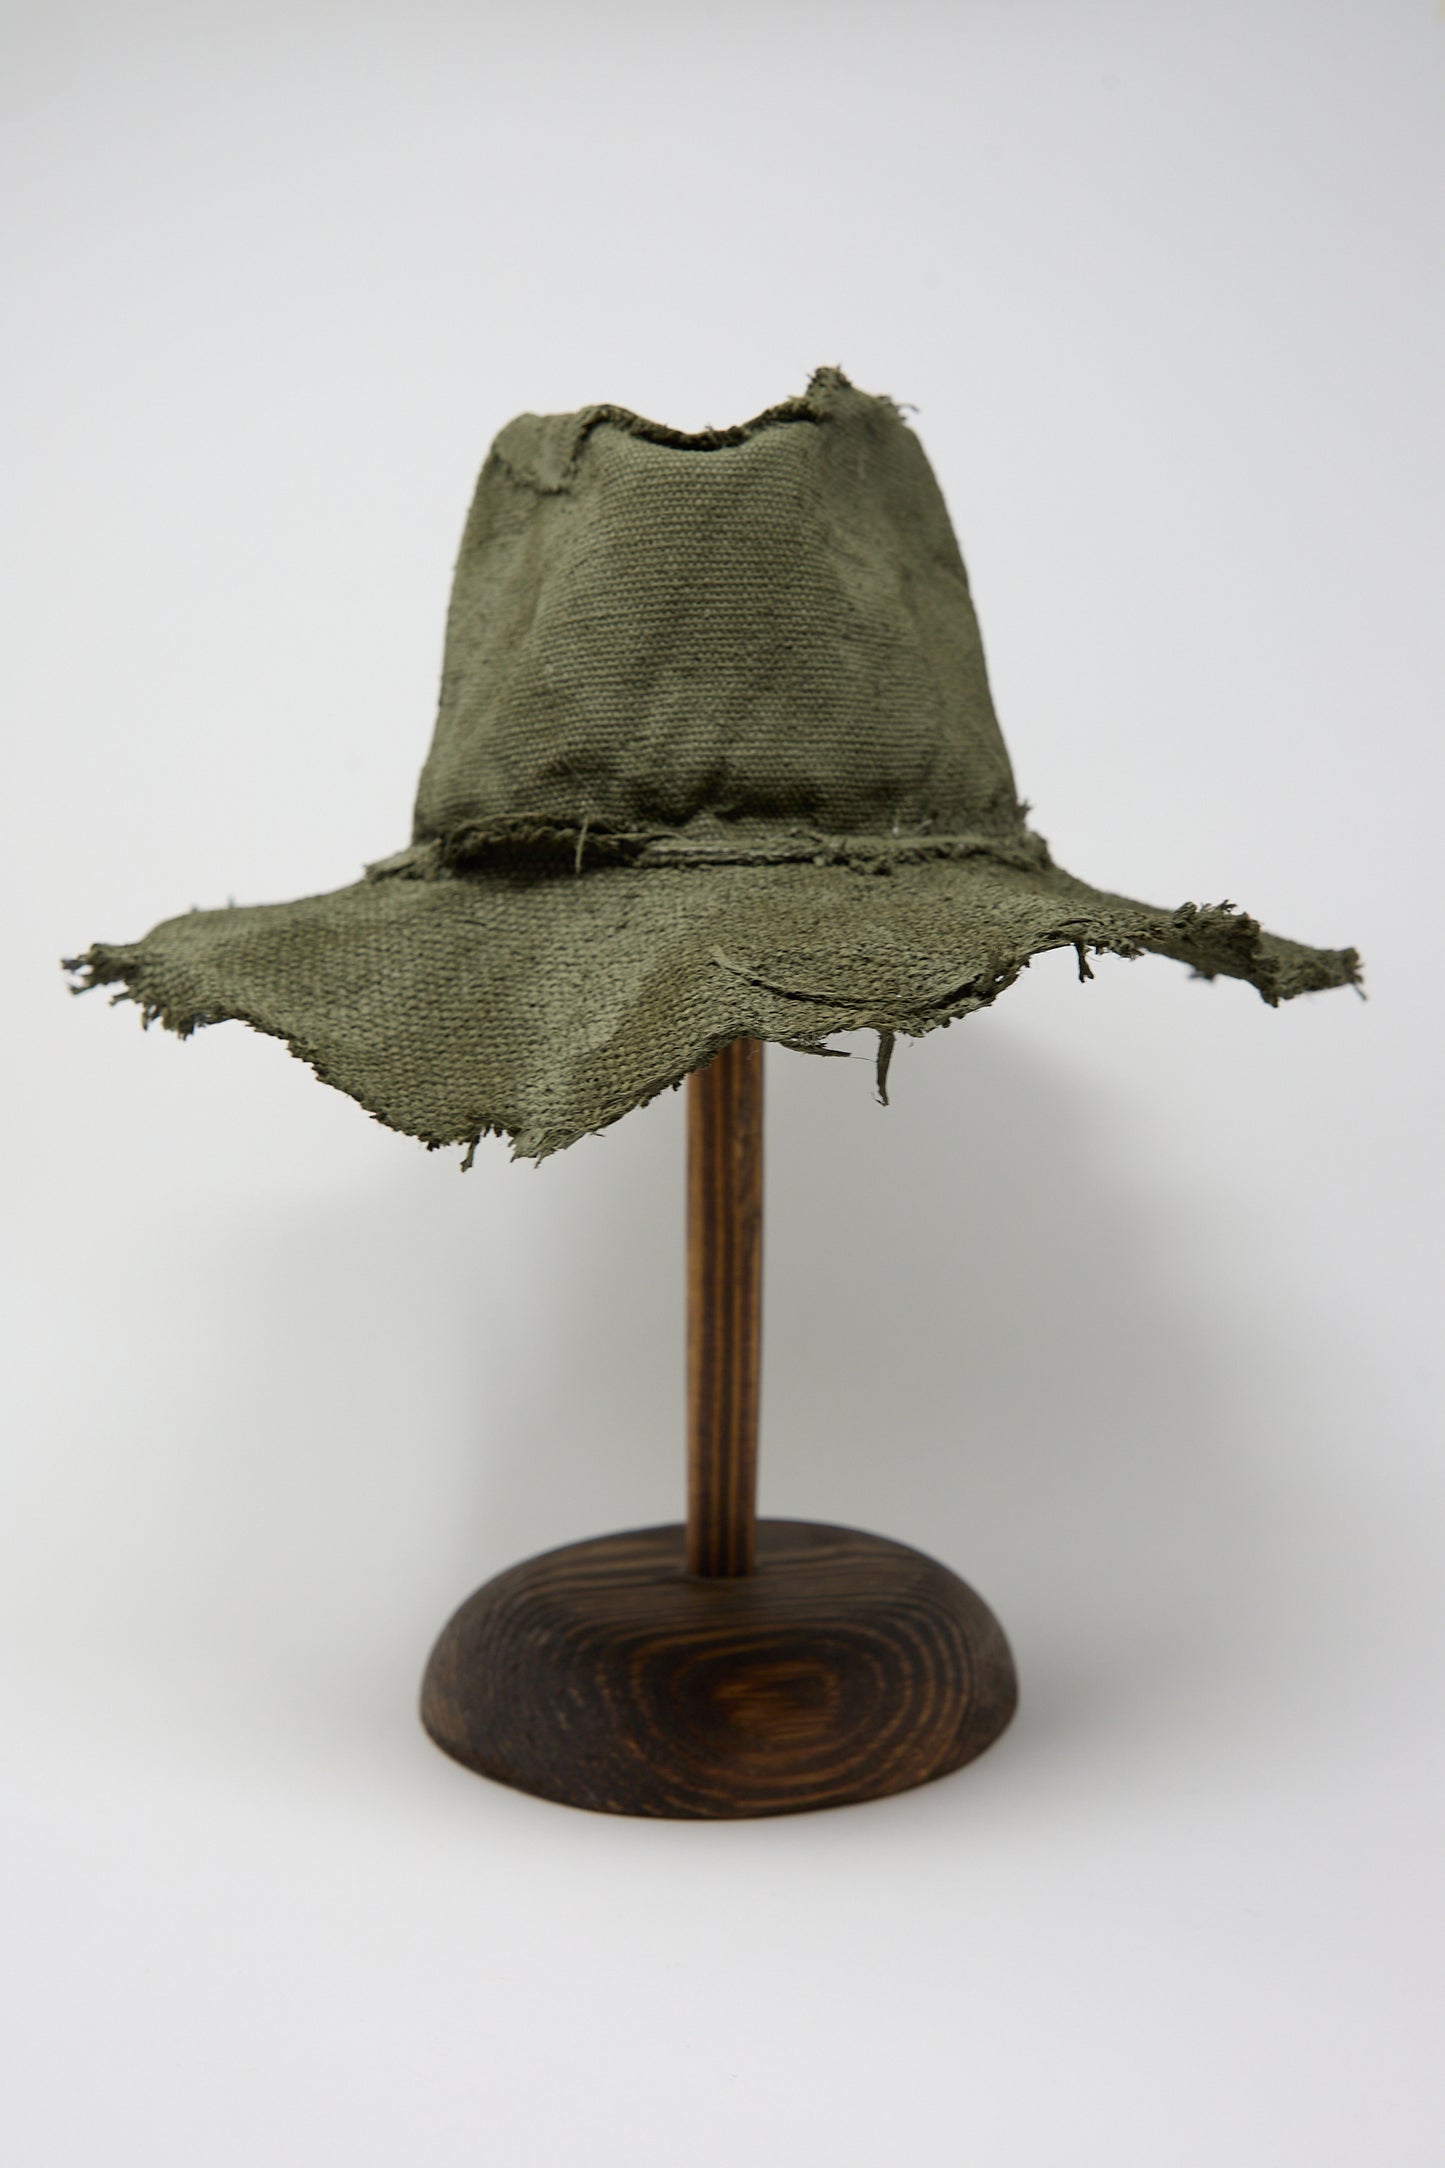 A worn and frayed Reinhard Plank Beghe S Jute Hat in Green displayed on a wooden stand against a white background.